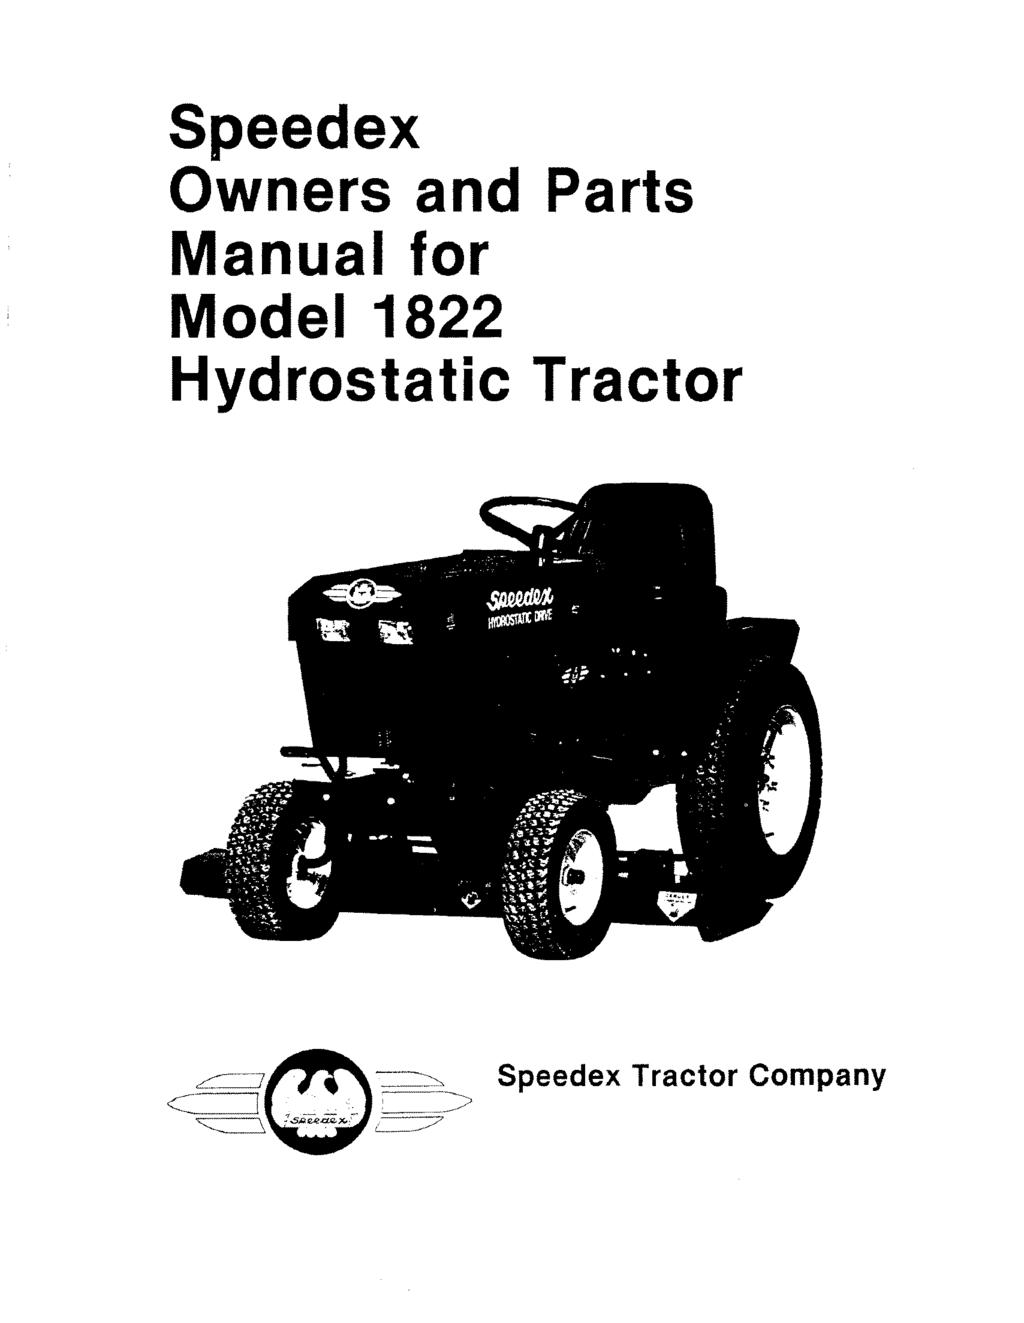 Speedex Owners and Parts Manual